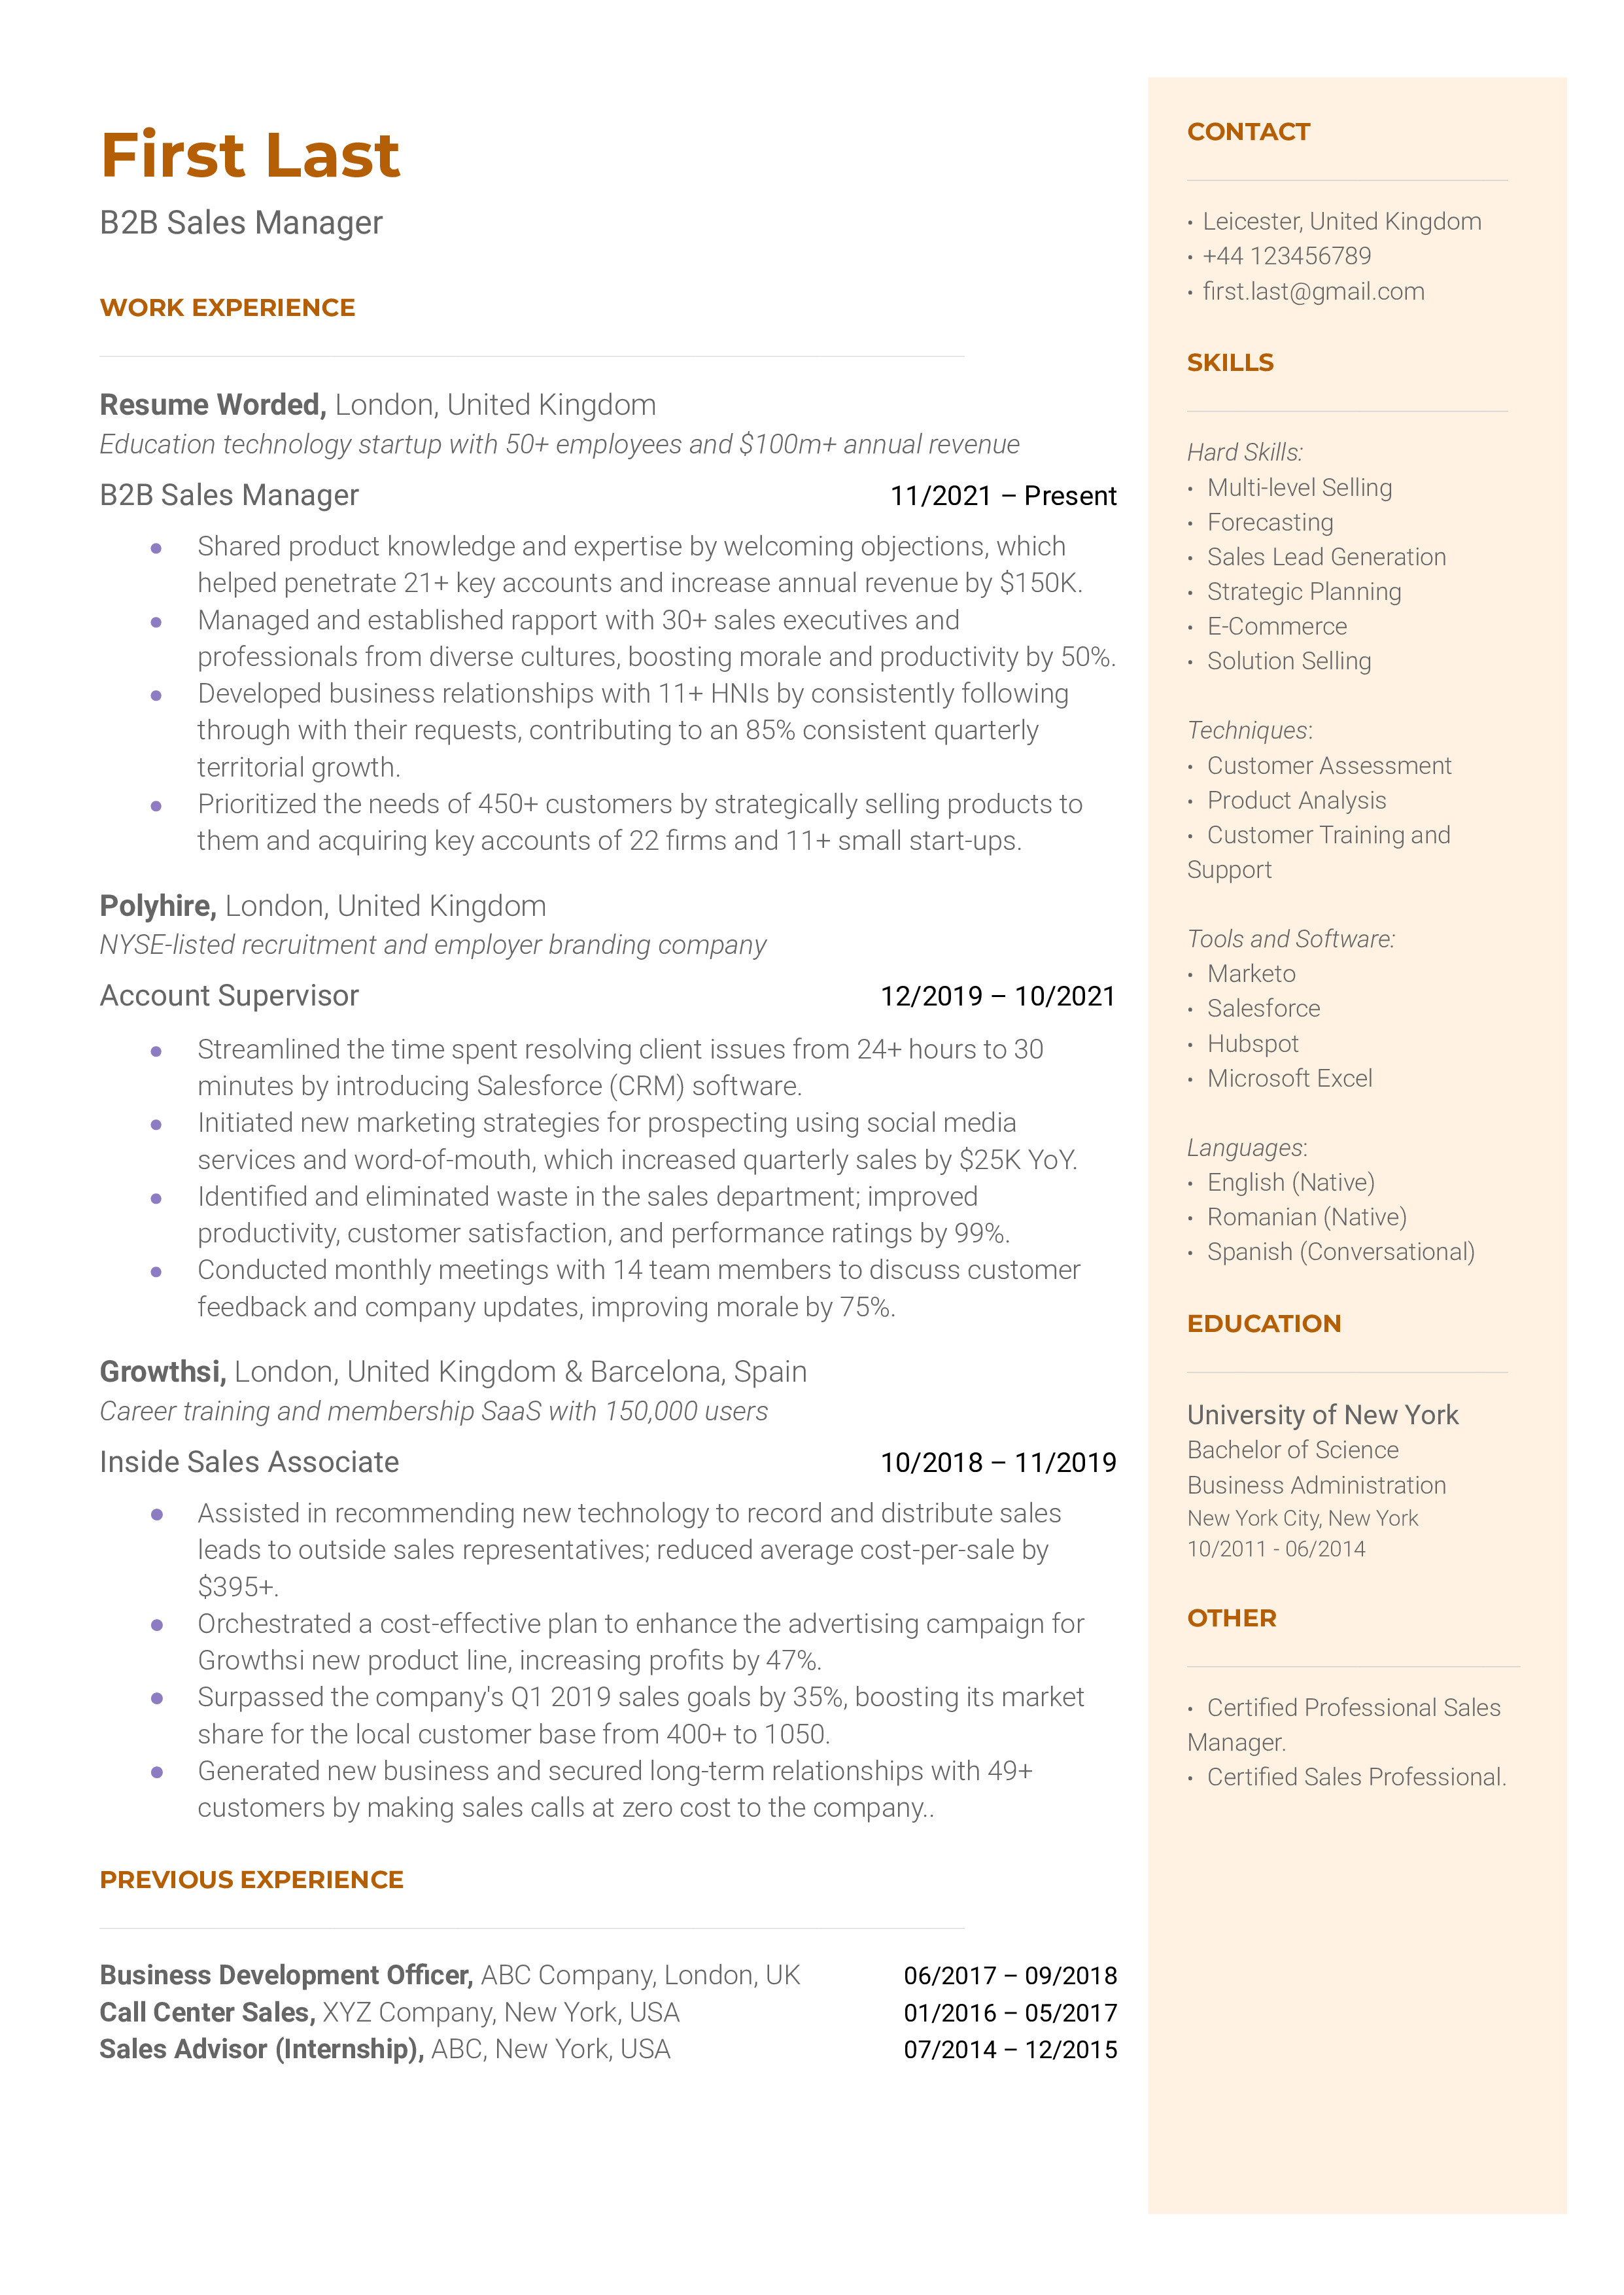 A B2B sales manager resume template that focuses on technical skills.